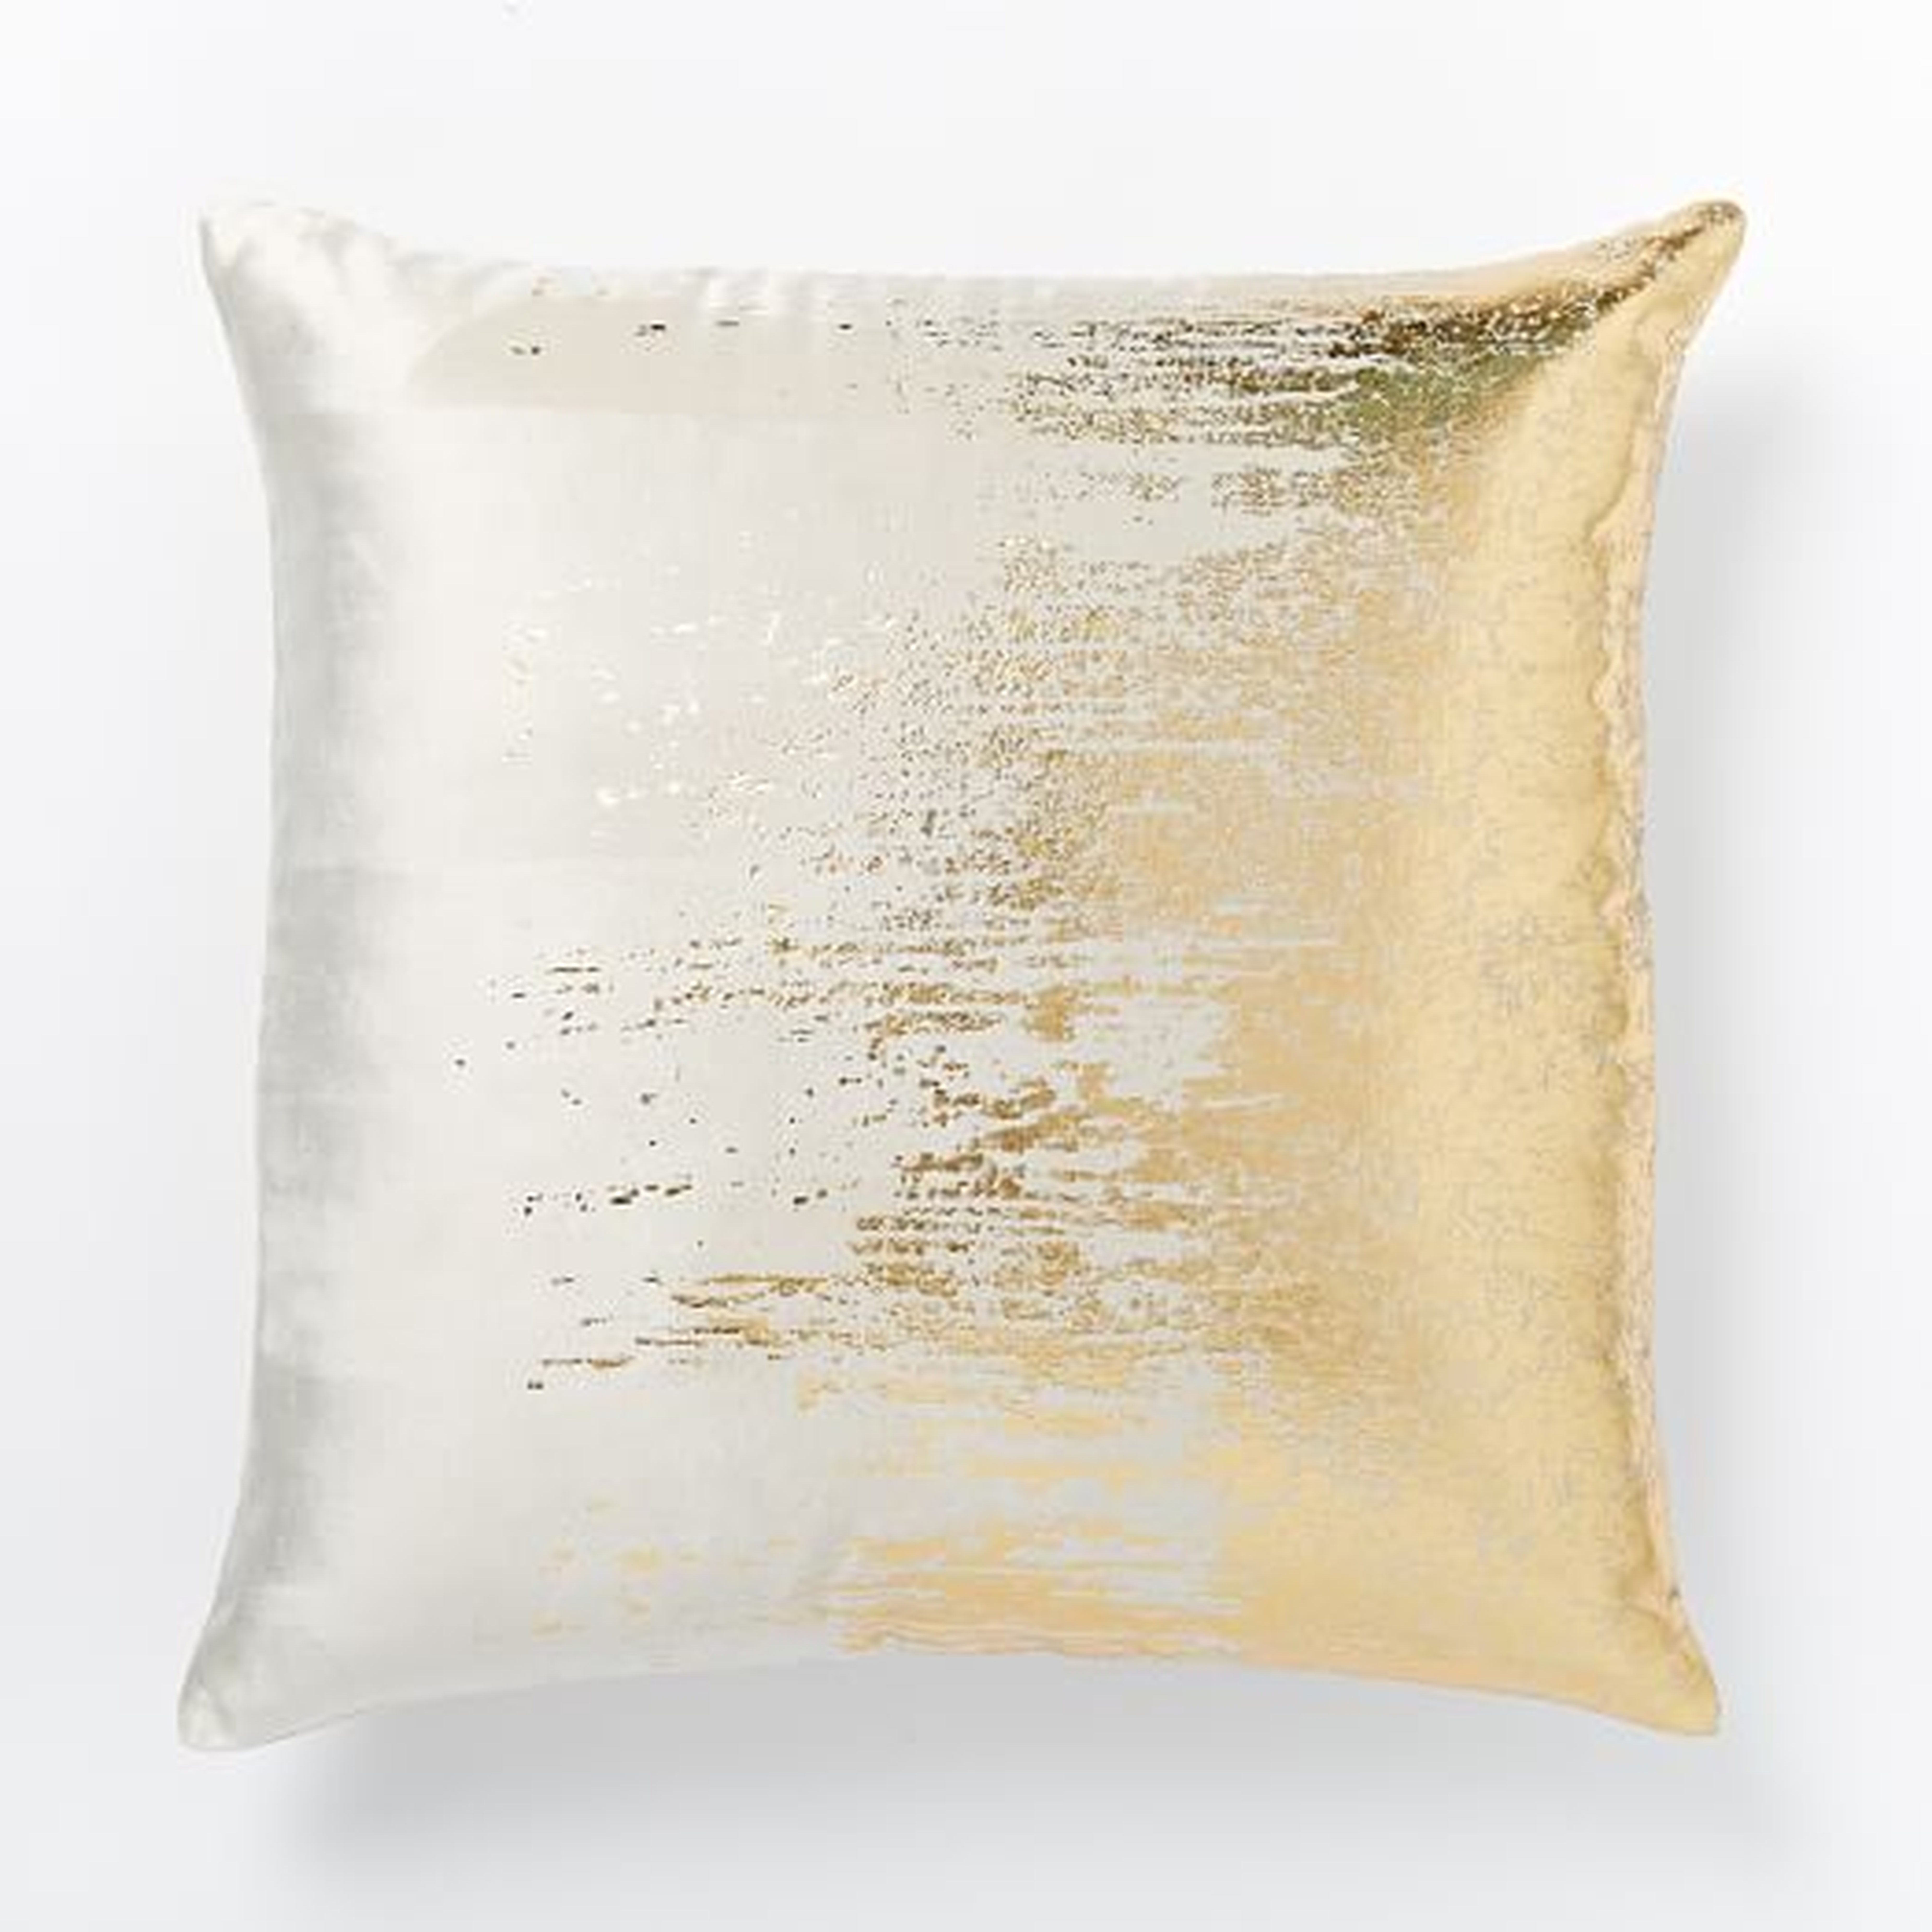 Faded Metallic Texture Pillow Cover - Gold - 18"sq - Insert sold separately - West Elm